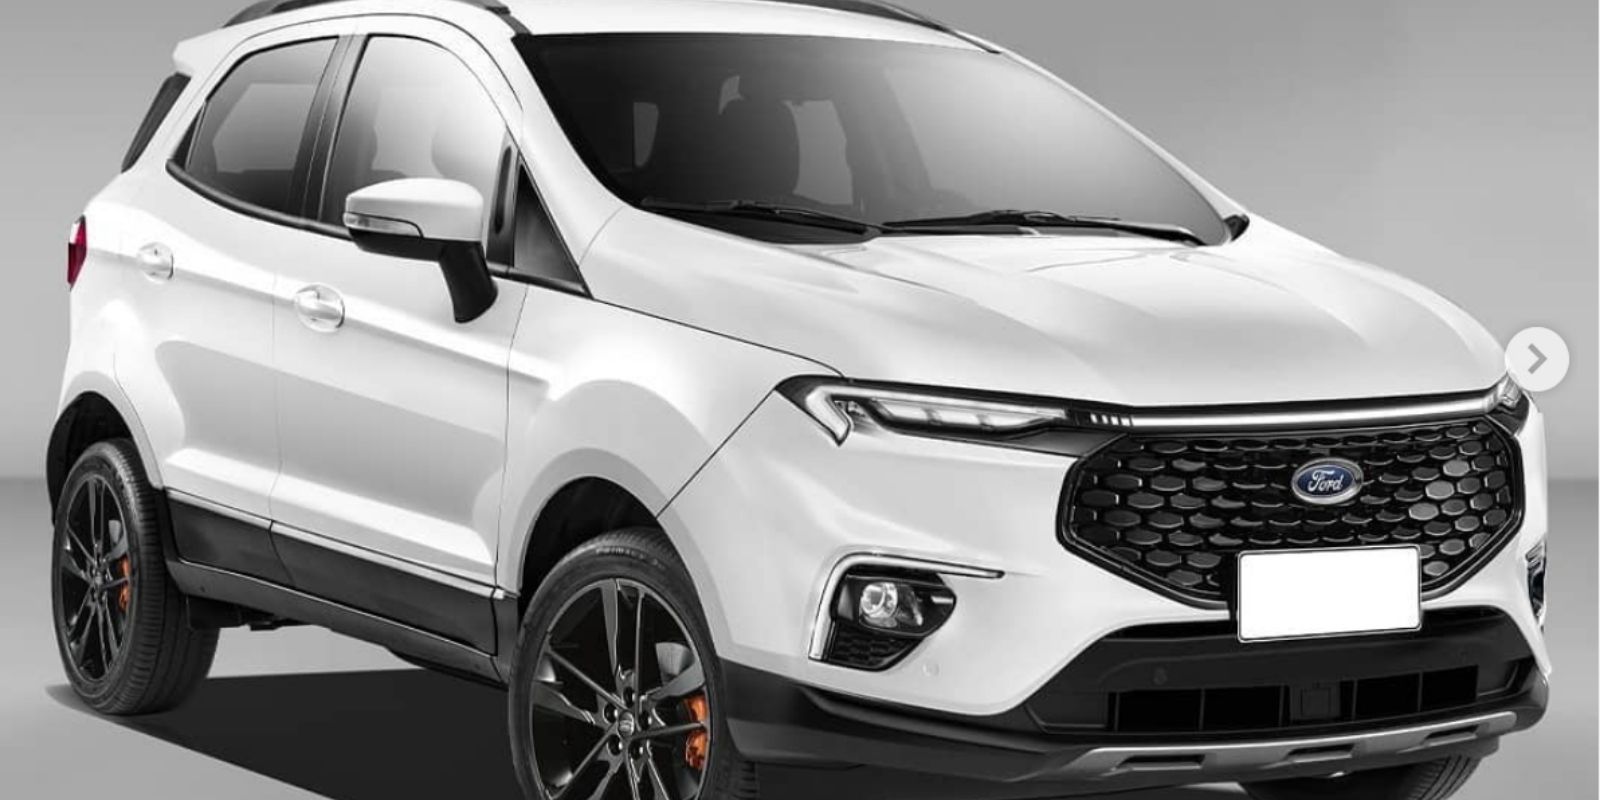 2022 Ford EcoSport Facelift Rendered With Visual Revisions